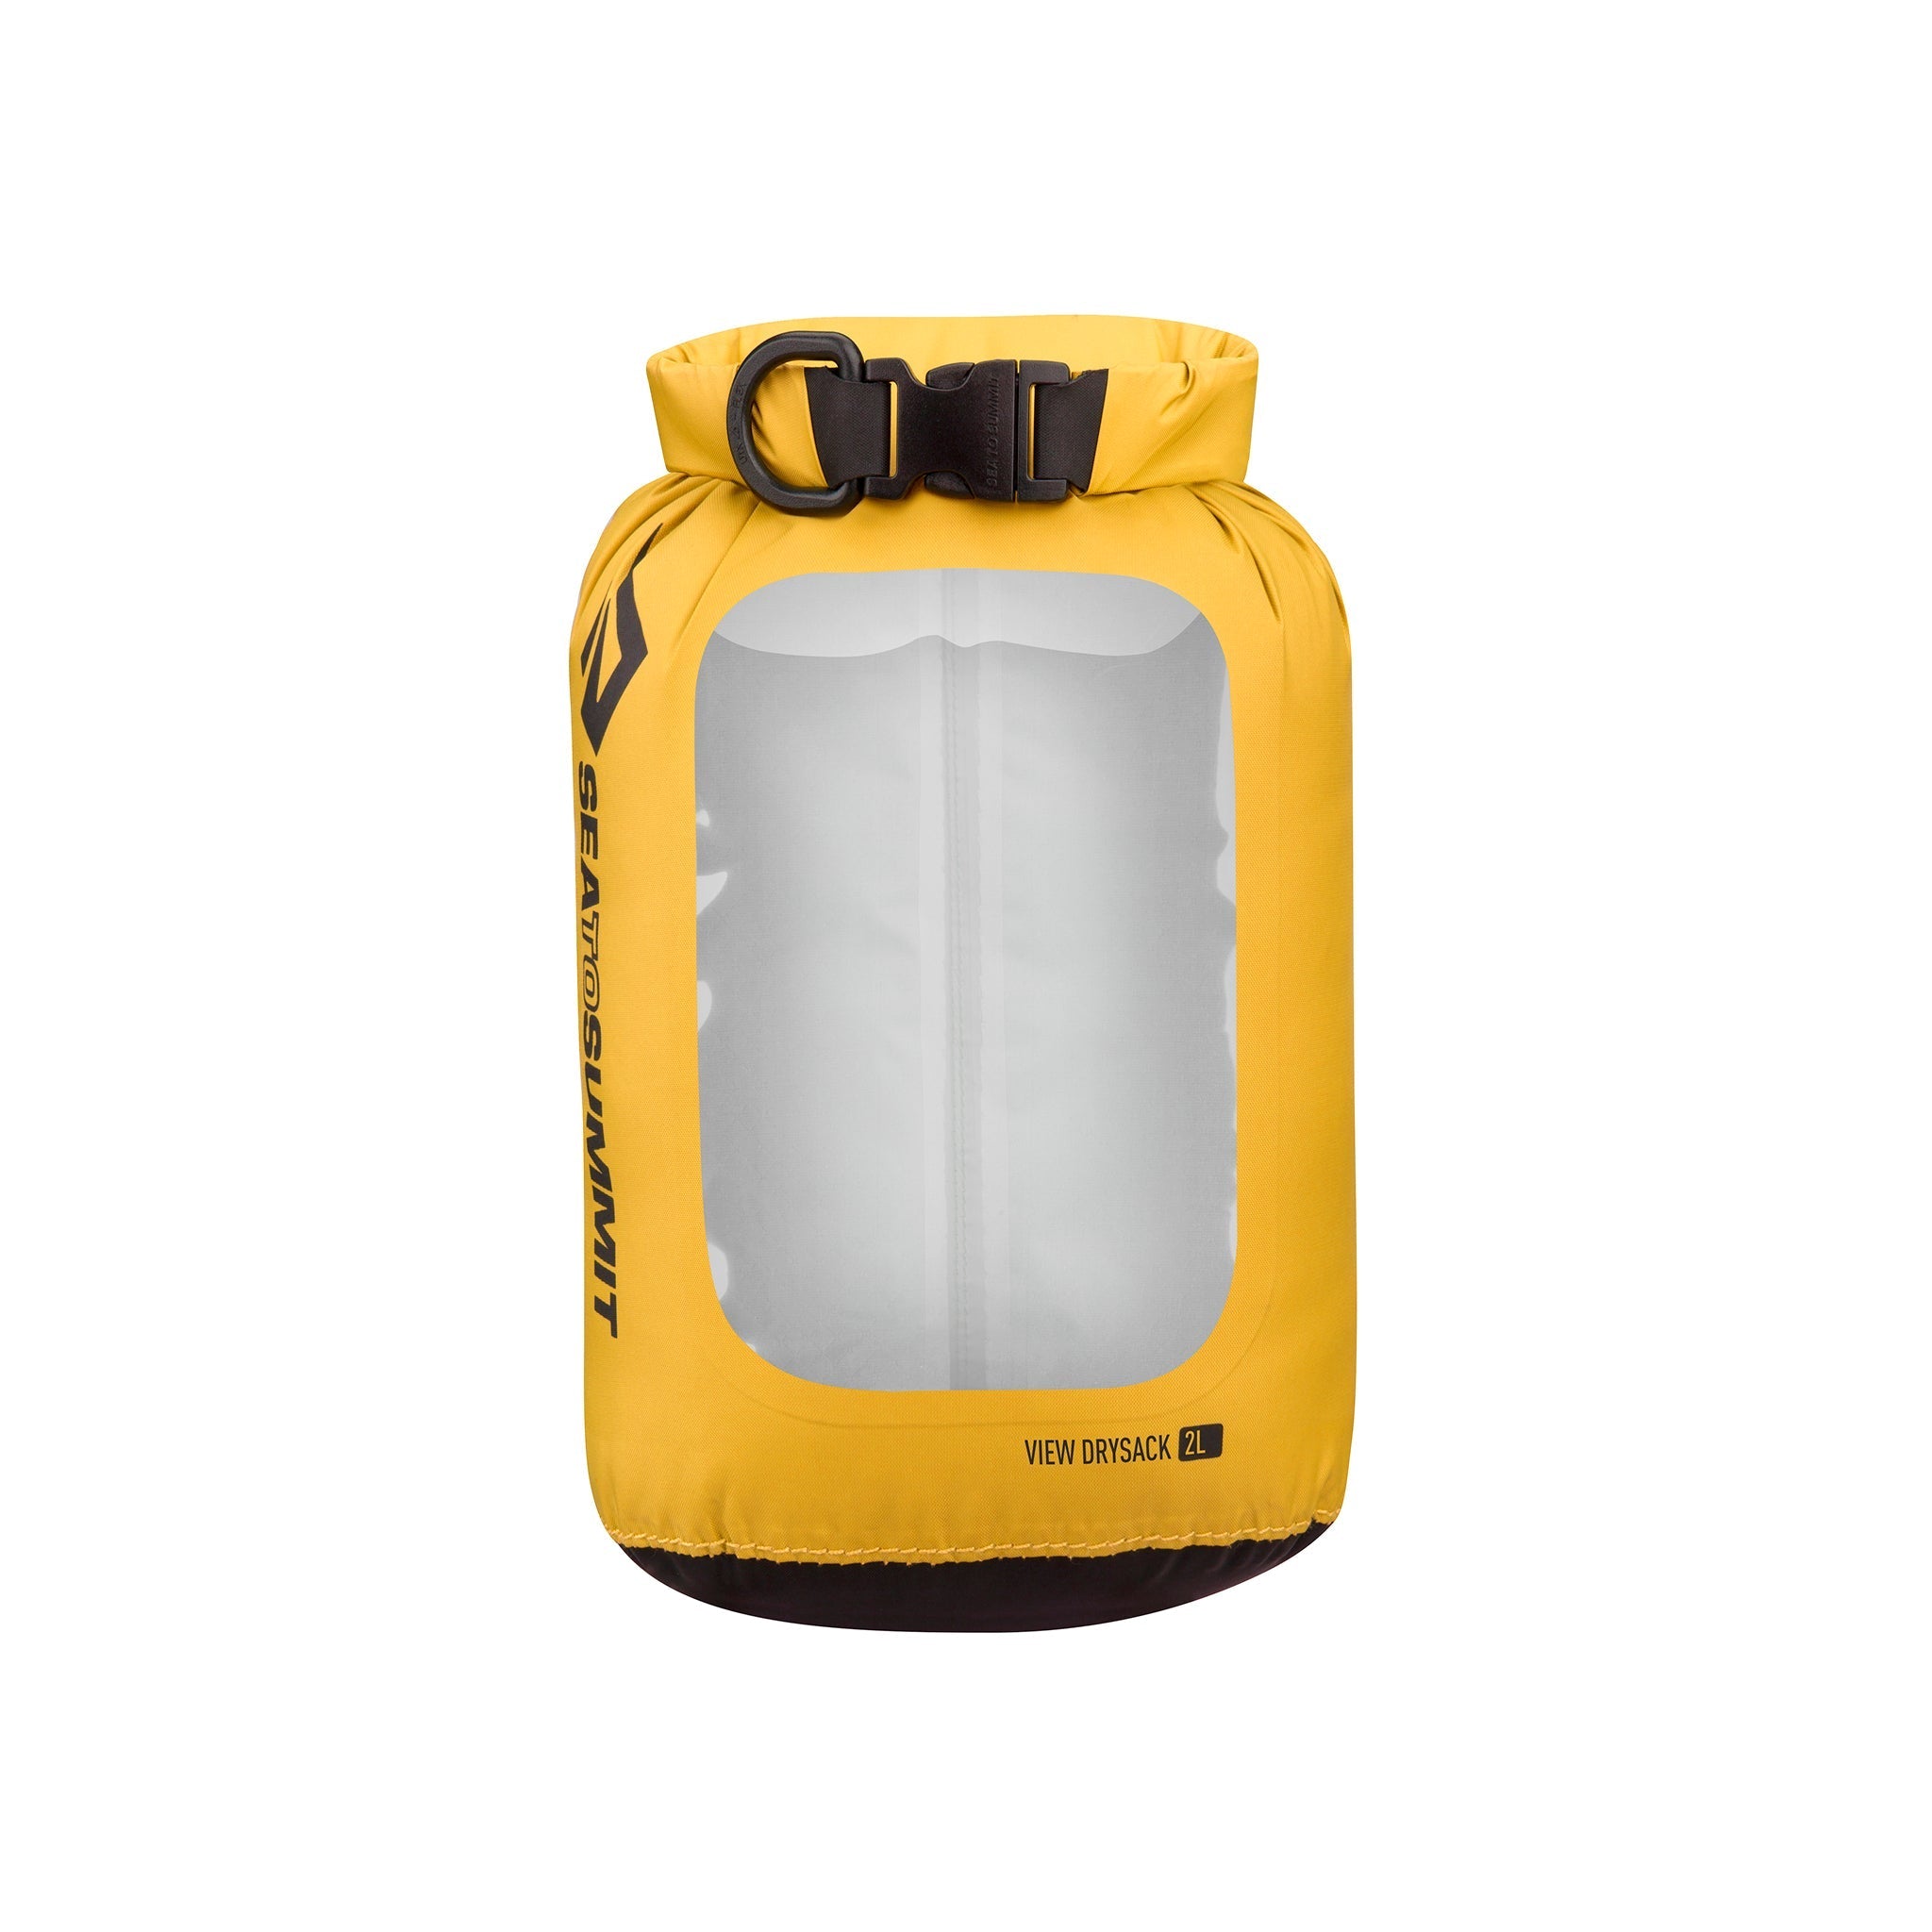 2 litre || Lightweight Dry Sack in Yellow